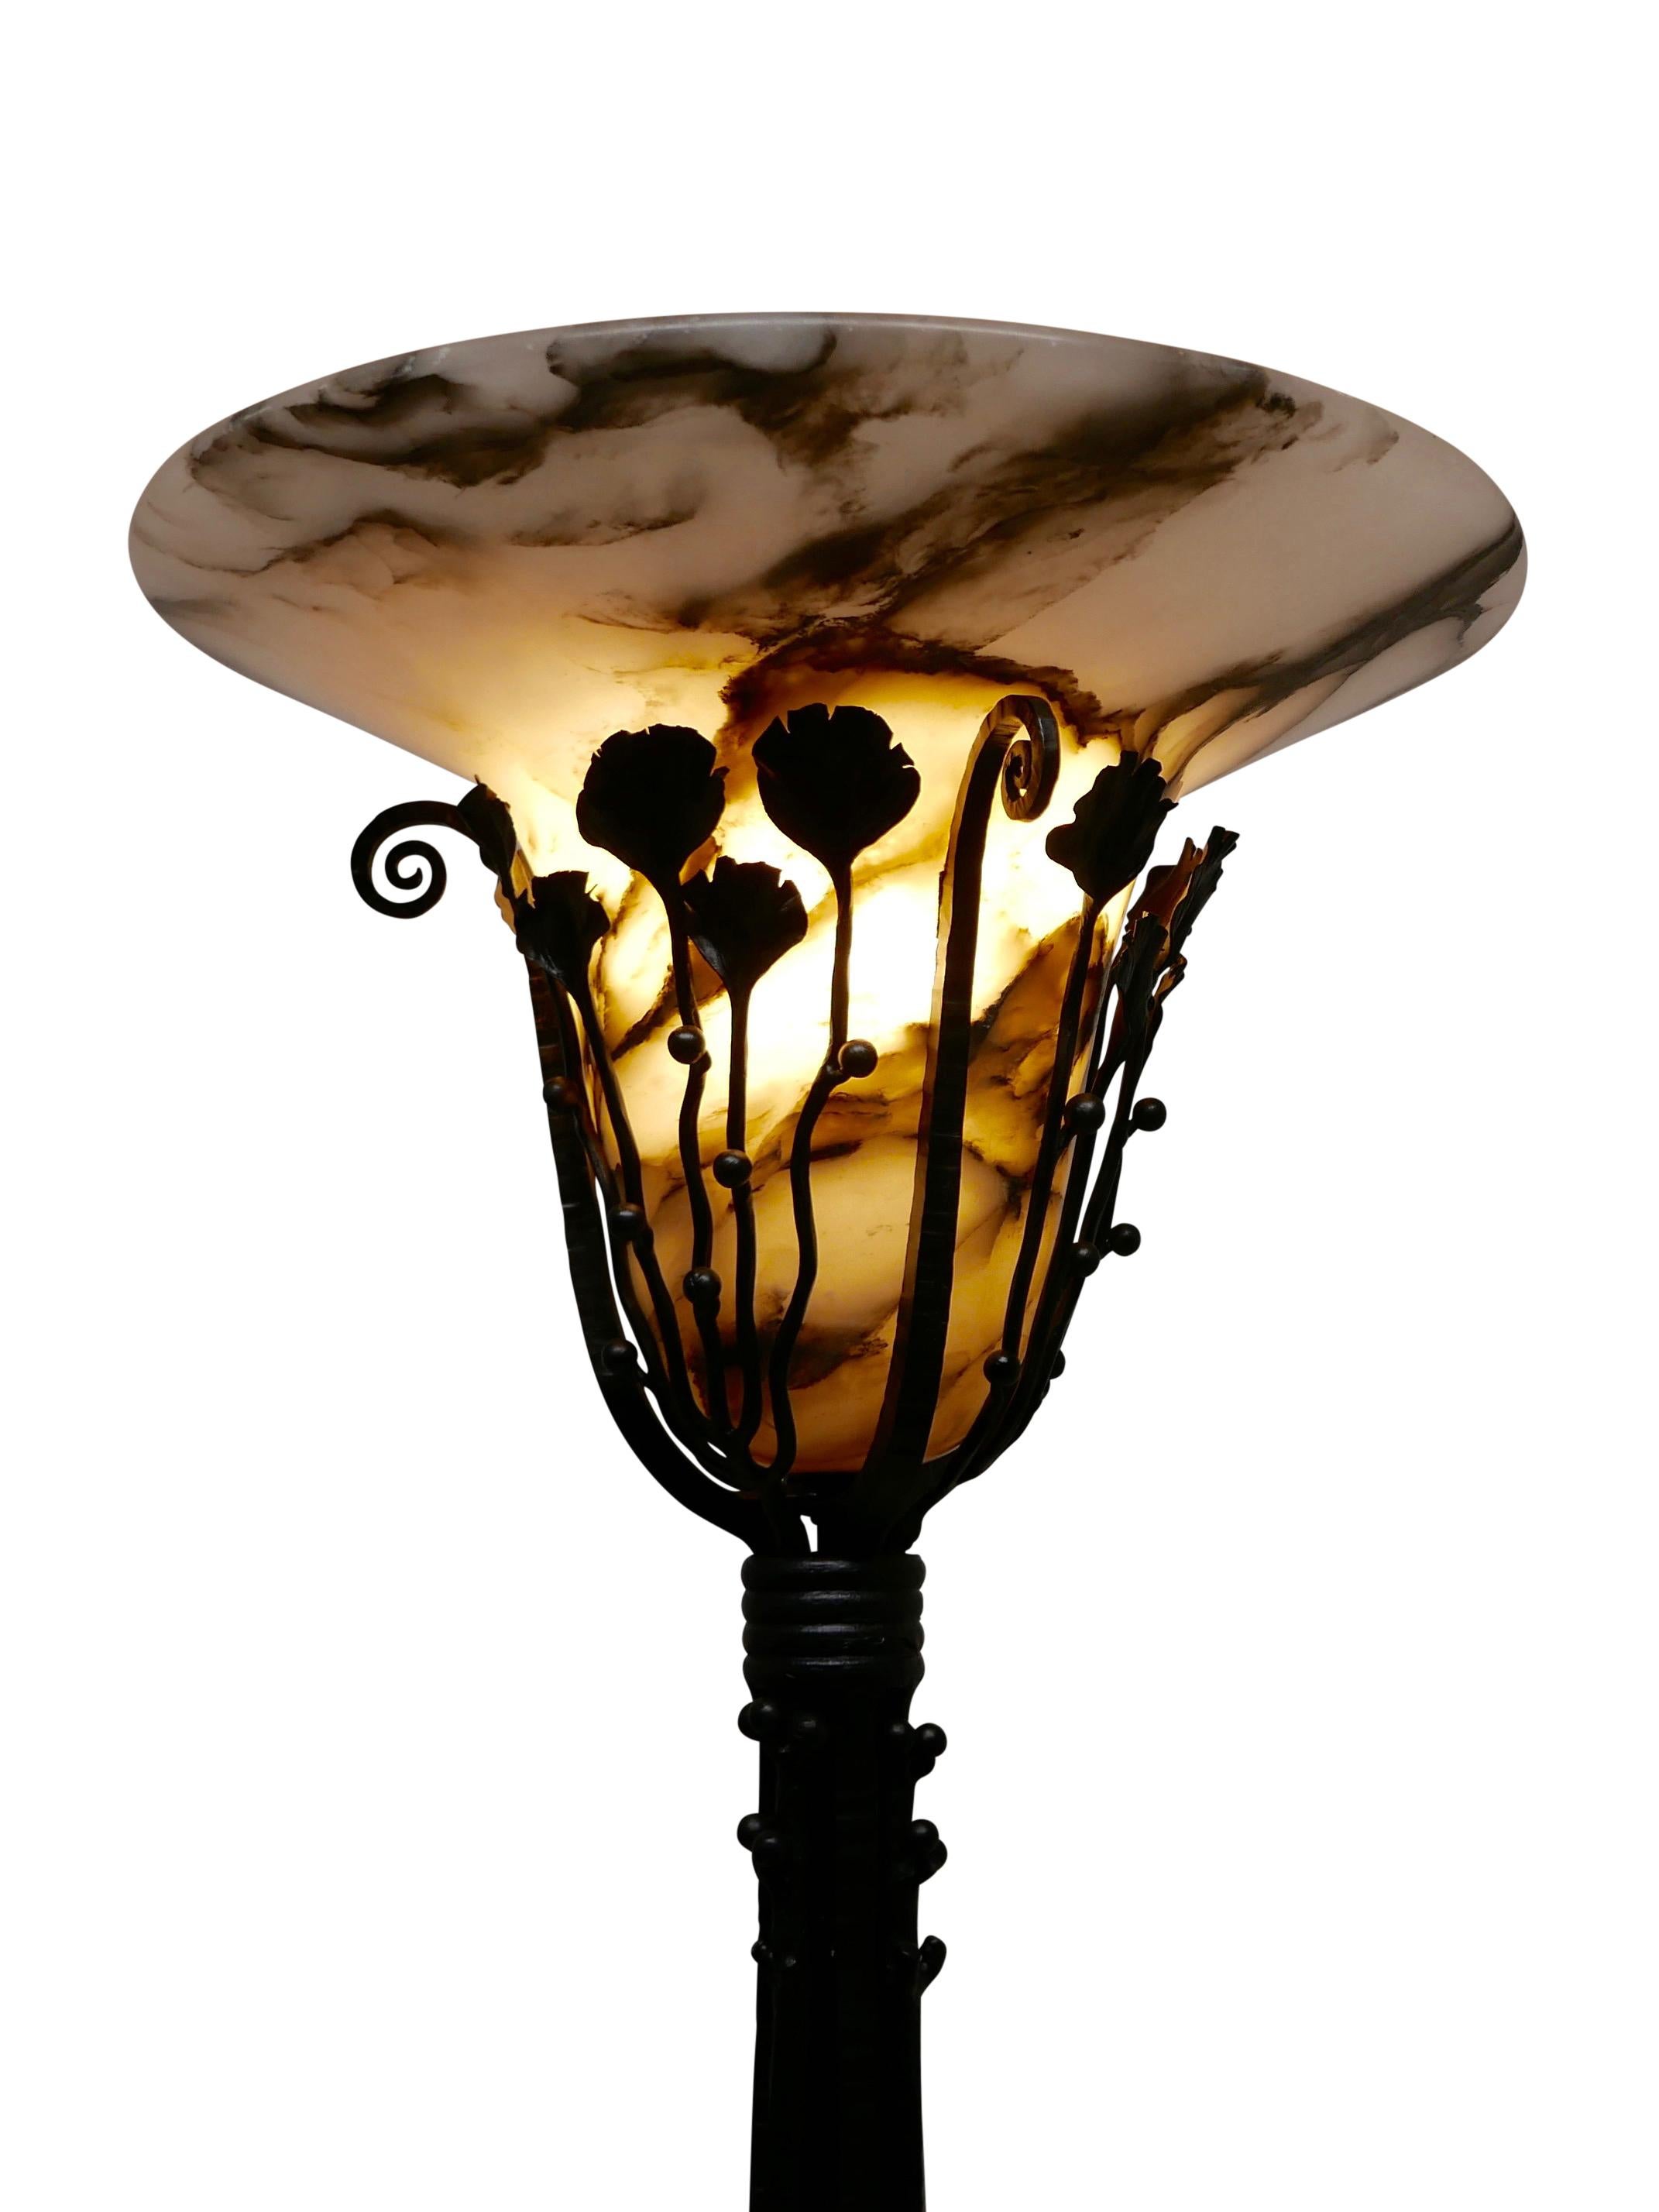 Art Deco Wrought Iron Floor Lamp with Alabaster Shade, French, circa 1920 For Sale 2